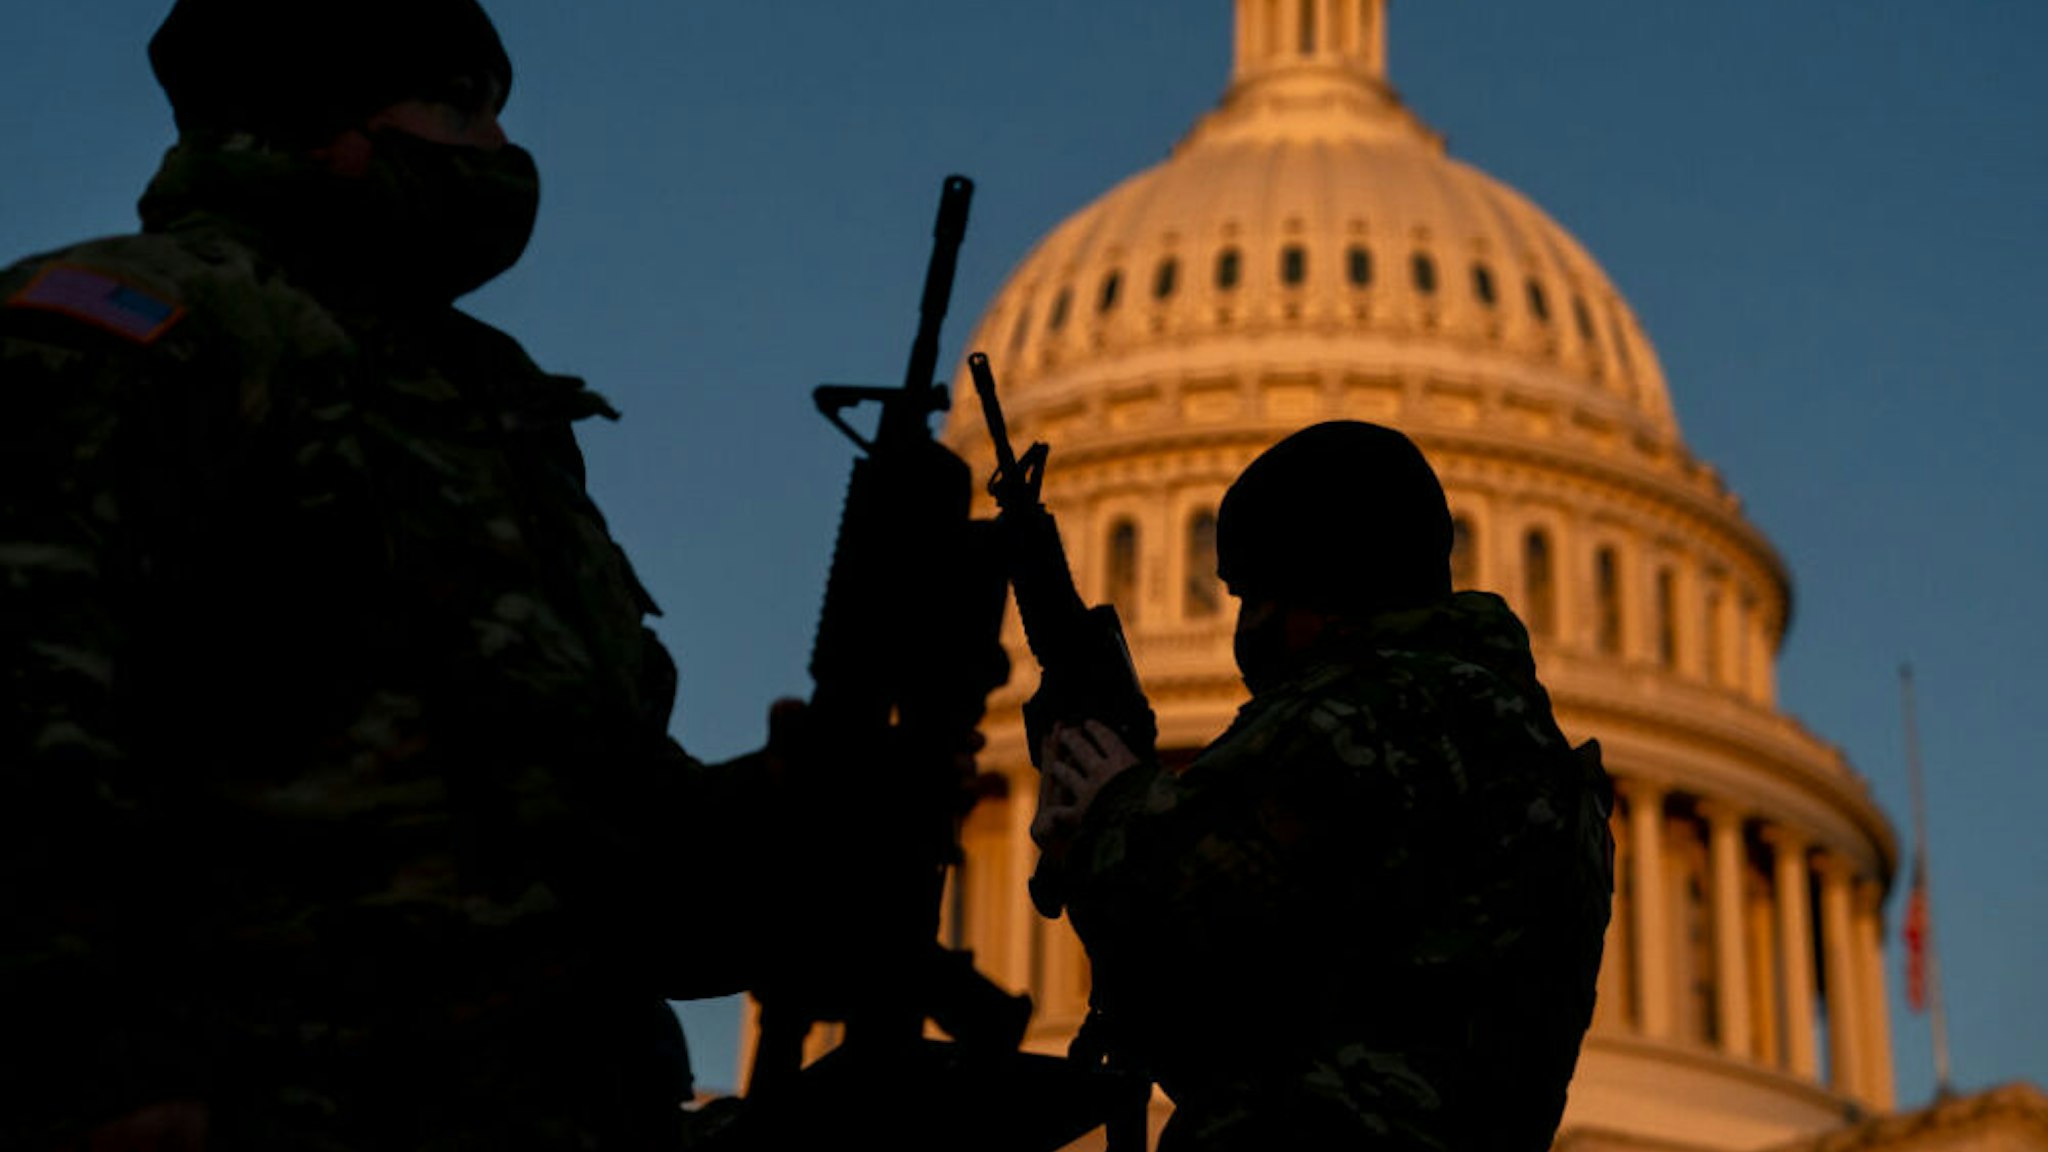 WASHINGTON, DC - JANUARY 13: Weapons are distributed to members of the National Guard outside the U.S. Capitol on January 13, 2021 in Washington, DC. Security has been increased throughout Washington following the breach of the U.S. Capitol last Wednesday, and leading up to the Presidential inauguration.